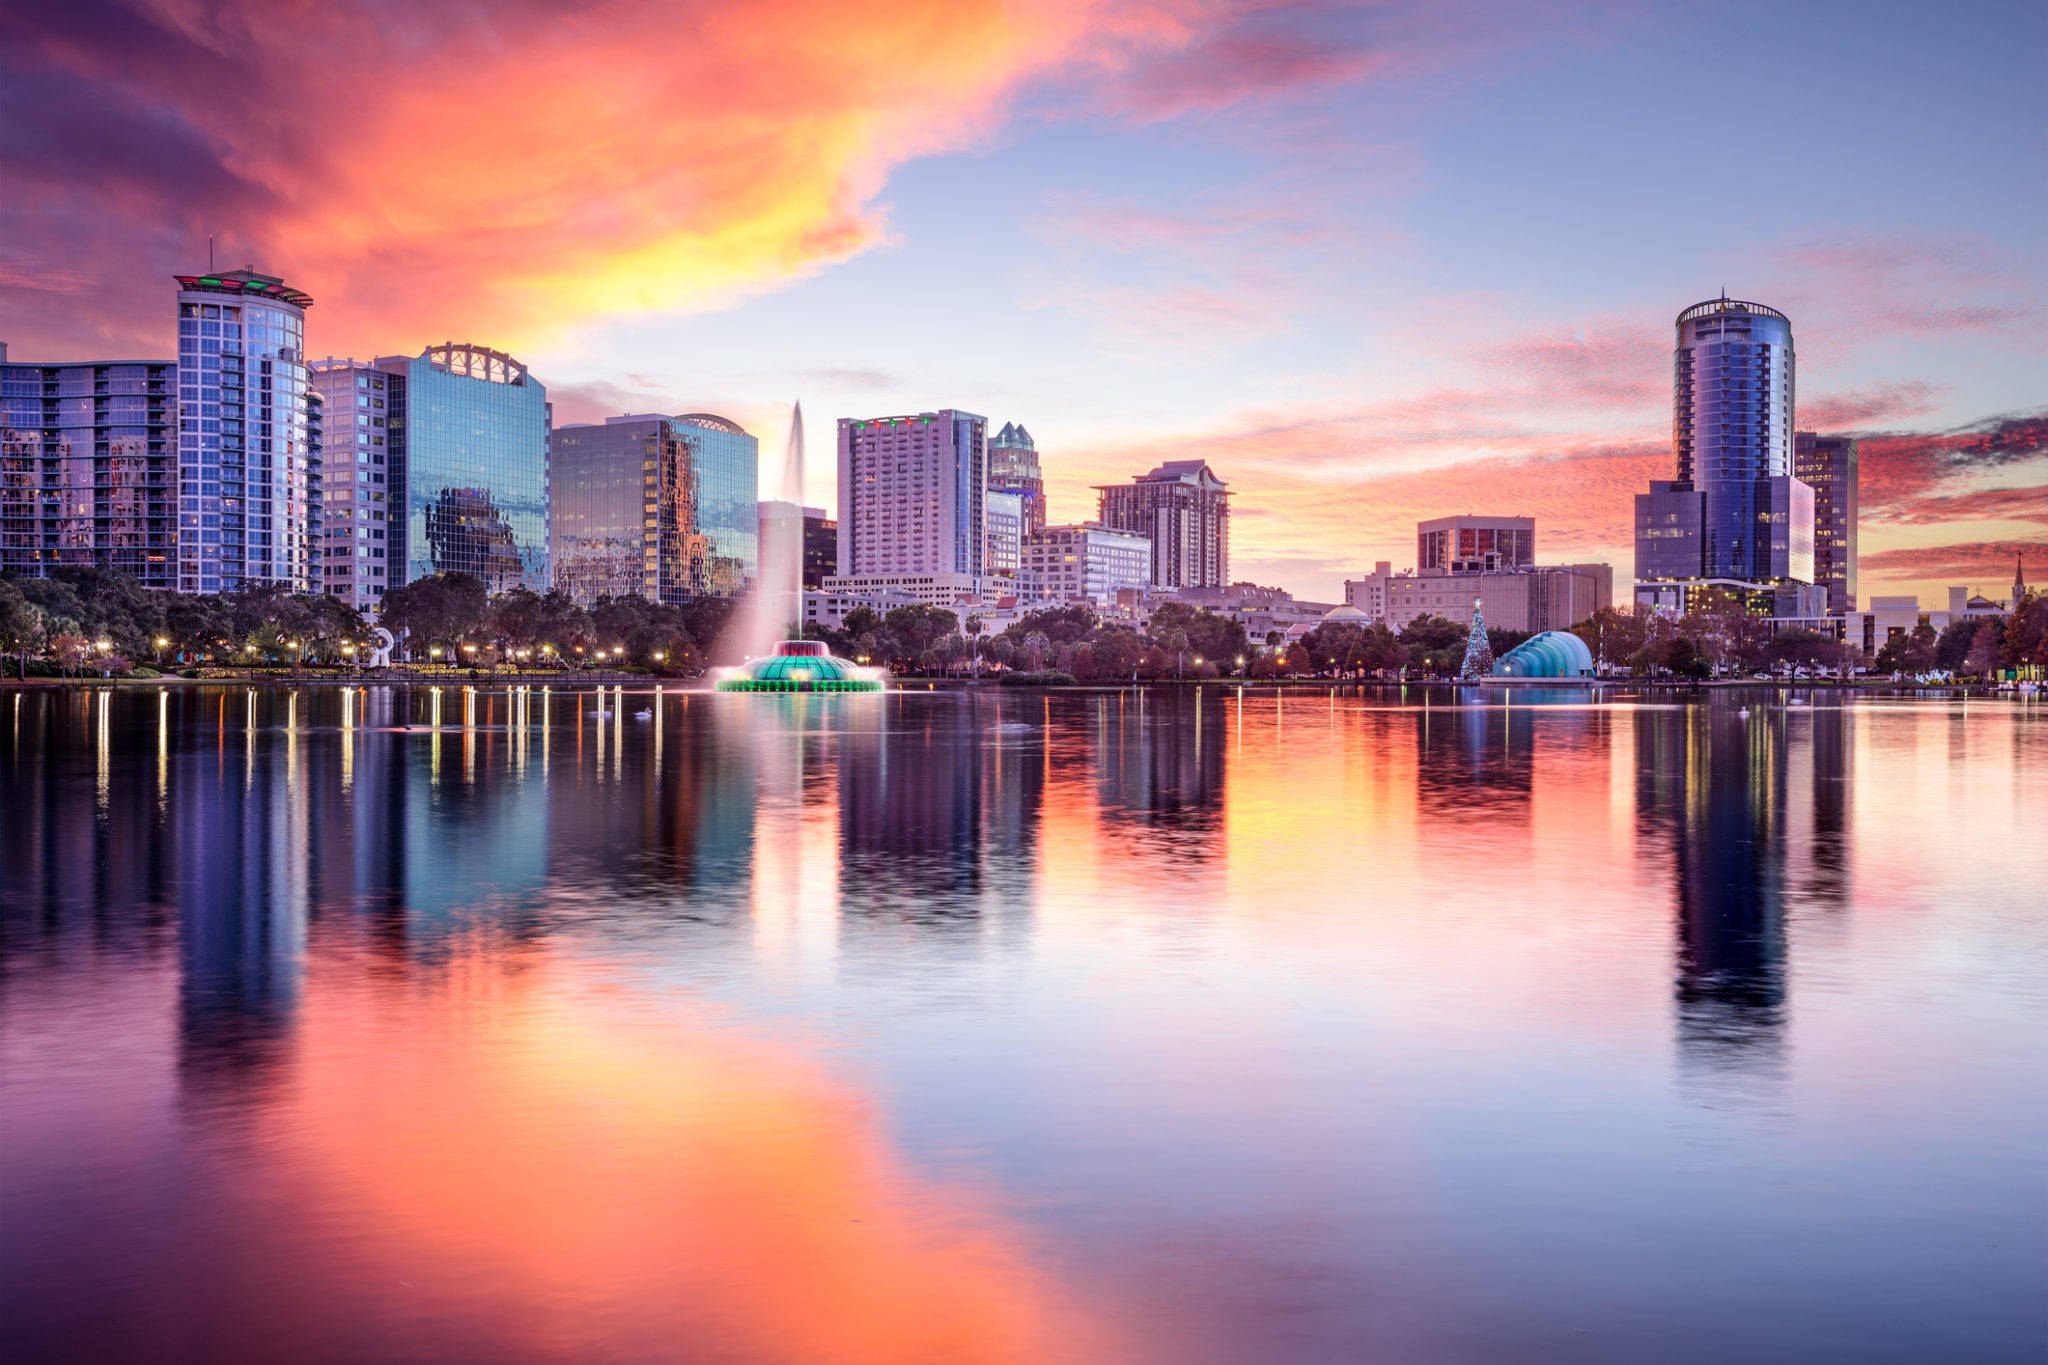 Fun On A Budget: Cheap Things To Do In Orlando